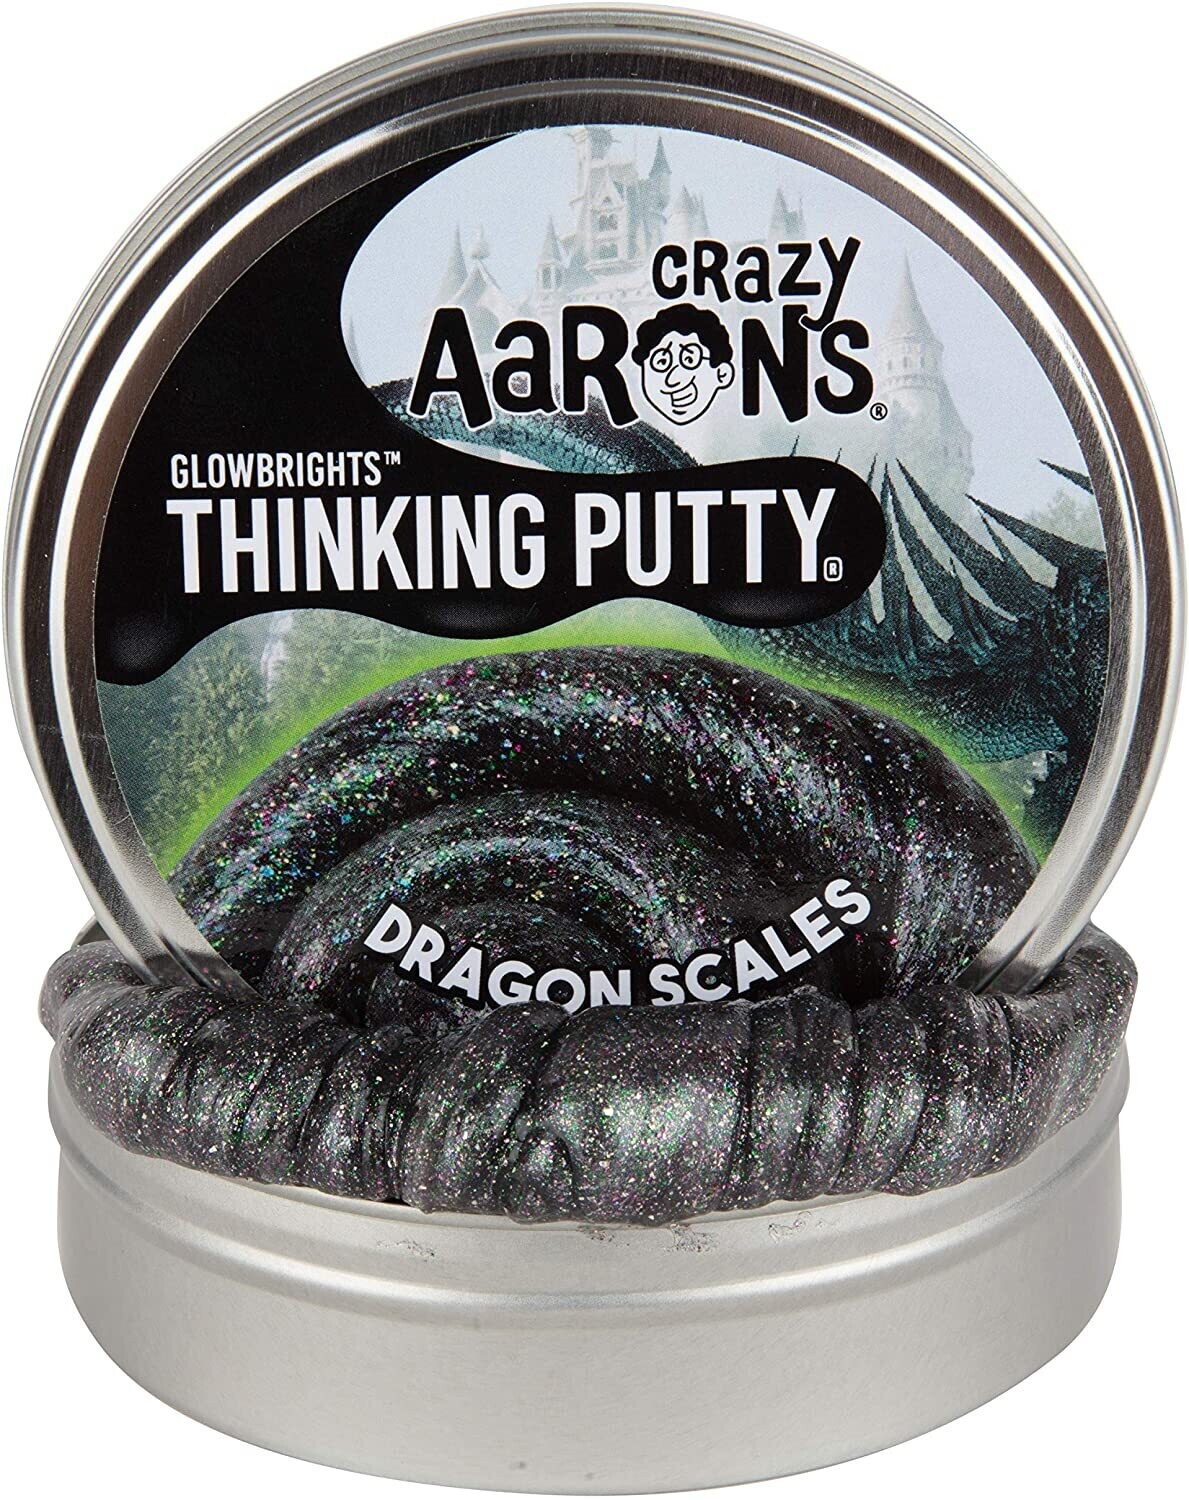 Crazy Aaron's Thinking Putty Glow Brights Dragon Scales